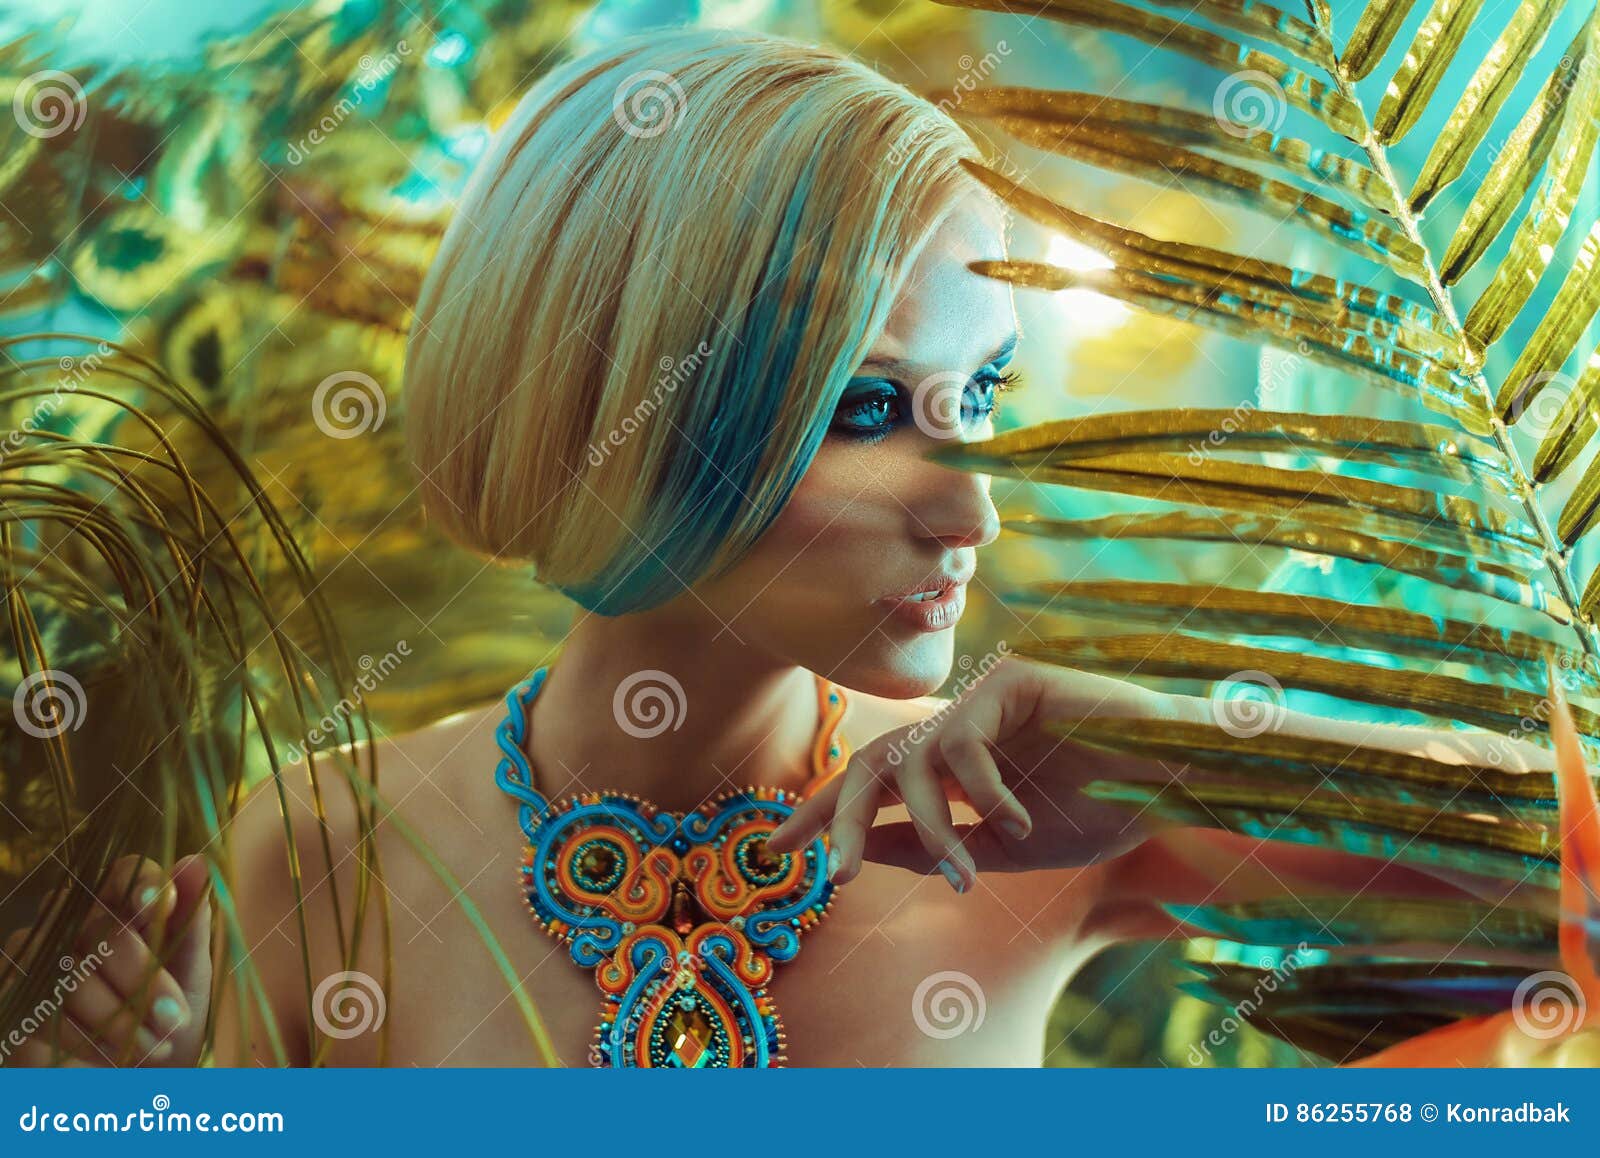 portrait of a sensual blond lady in the tropics